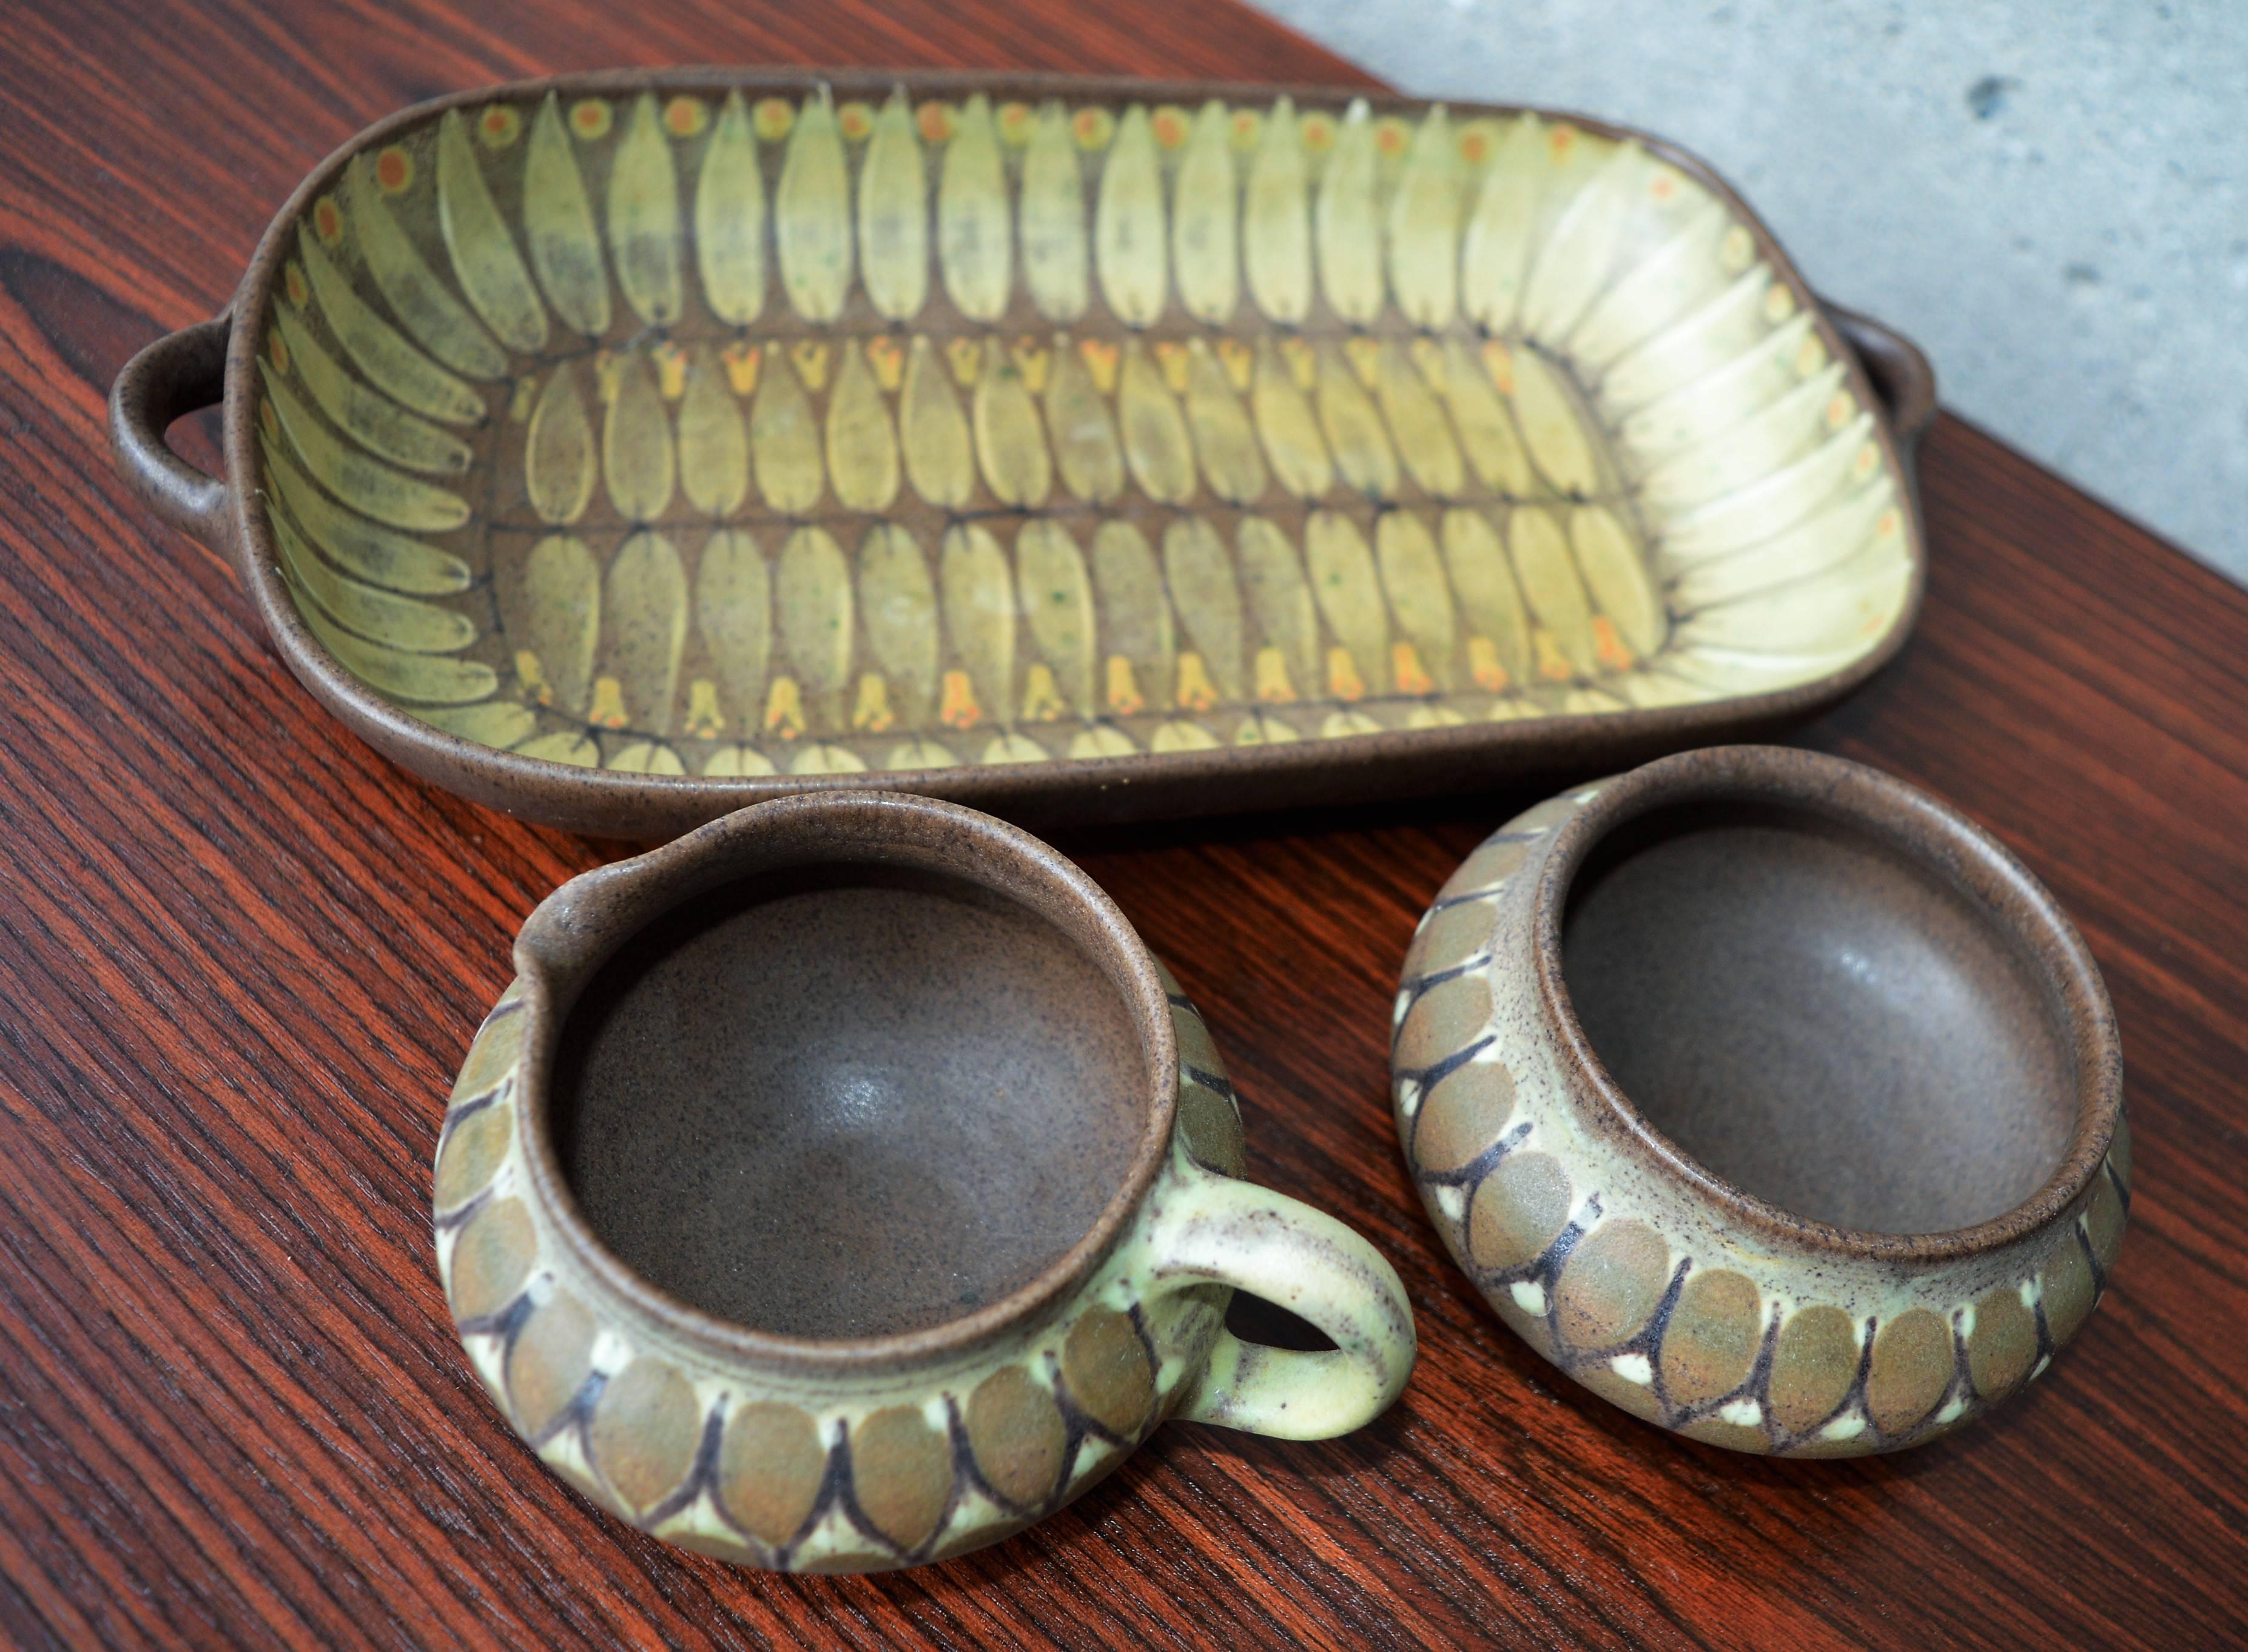 Margrethe Dybdahl Denmark Ceramic Platter with Handles, Sugar Bowl & Creamer In Excellent Condition For Sale In New Westminster, British Columbia